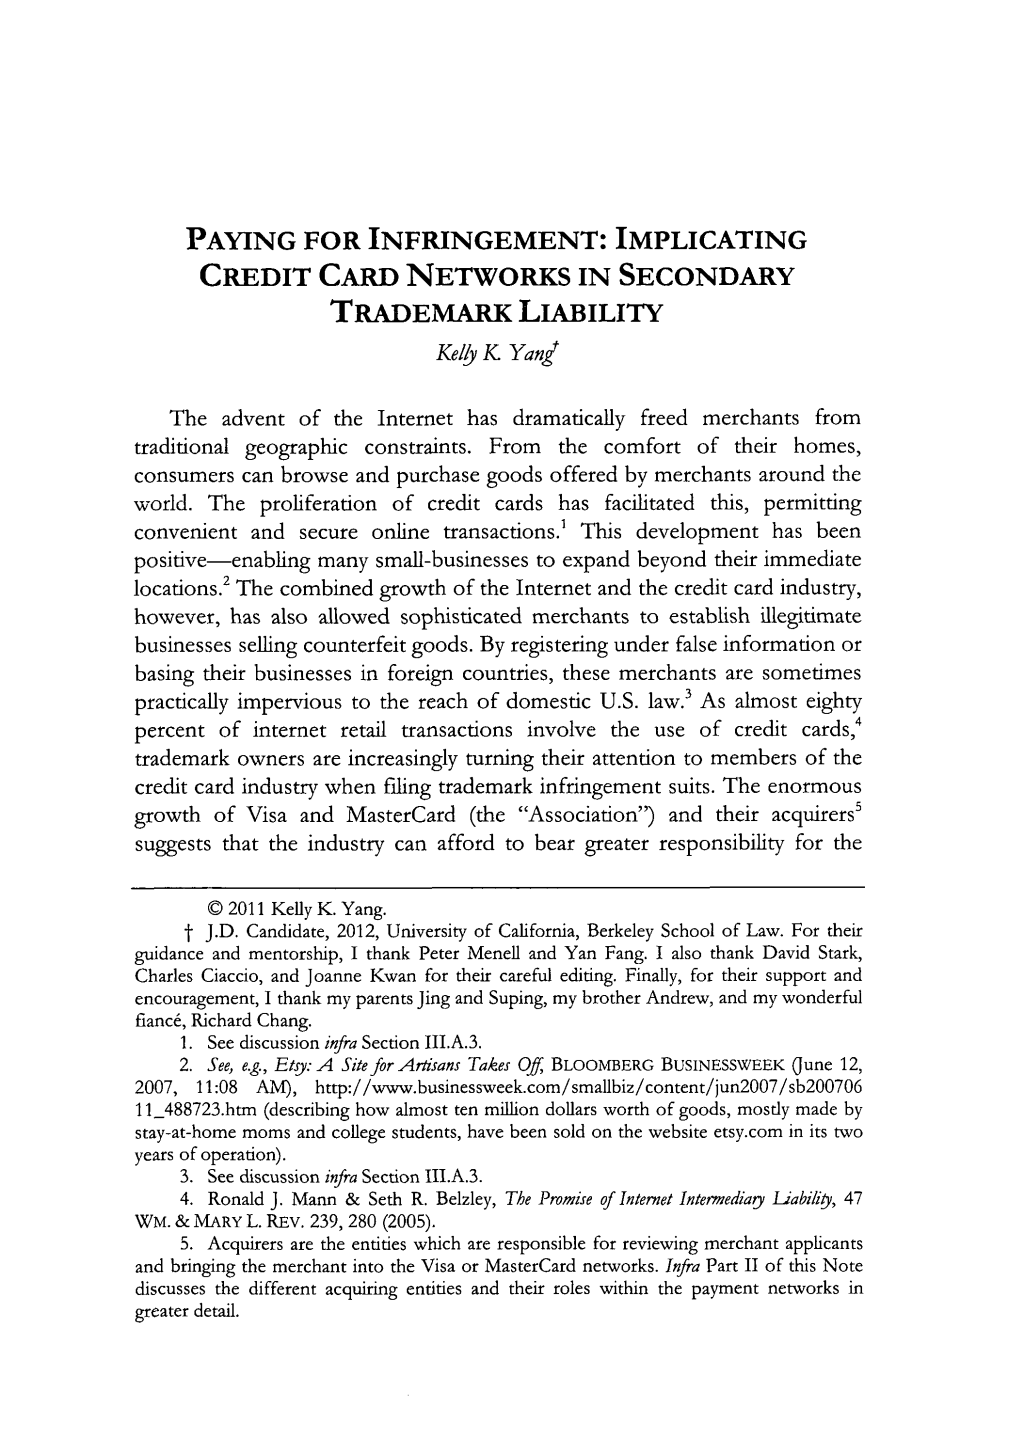 IMPLICATING CREDIT CARD NETWORKS in SECONDARY TRADEMARK LIABILITY Kelly K Yangj